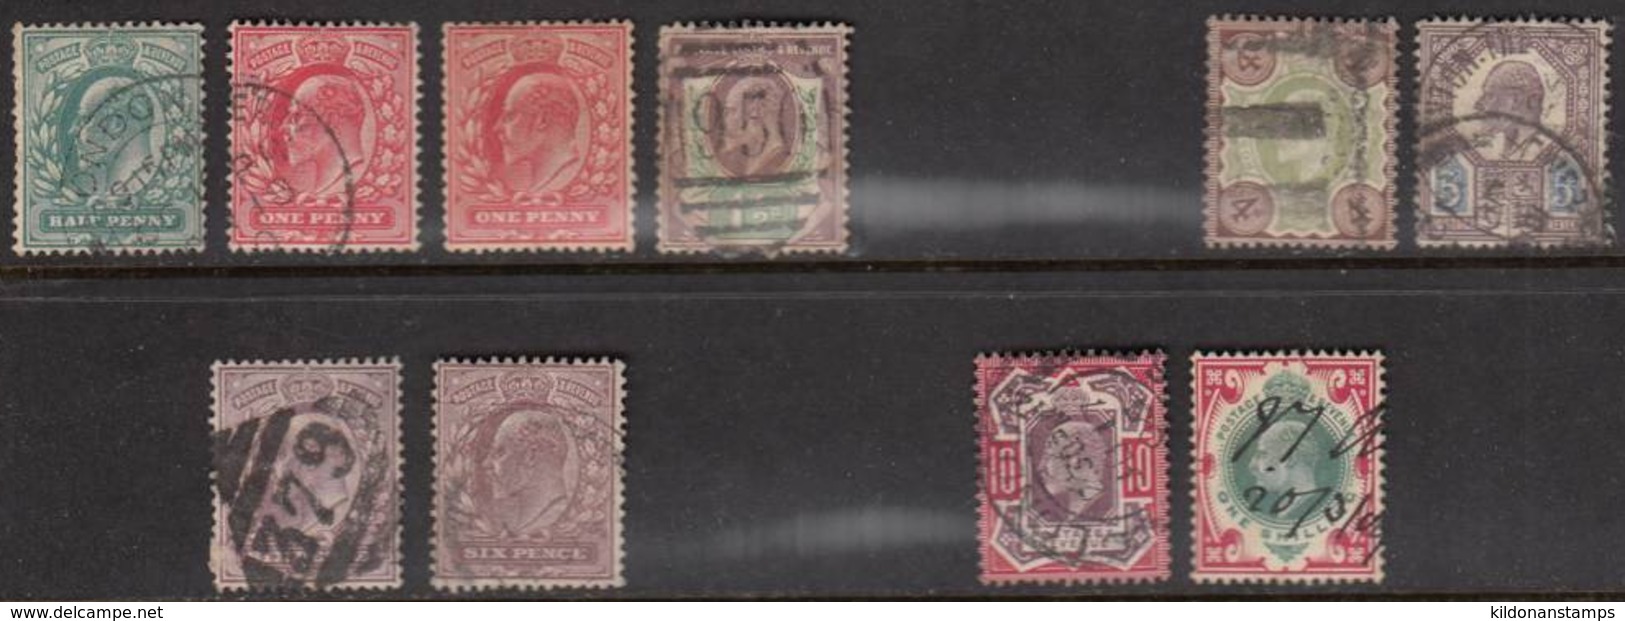 Great Britain 1902 Mint Mounted/cancelled, See Notes, Sc# 127-129,133-134,135a,135b,137a,140 (incl 128a) - Used Stamps